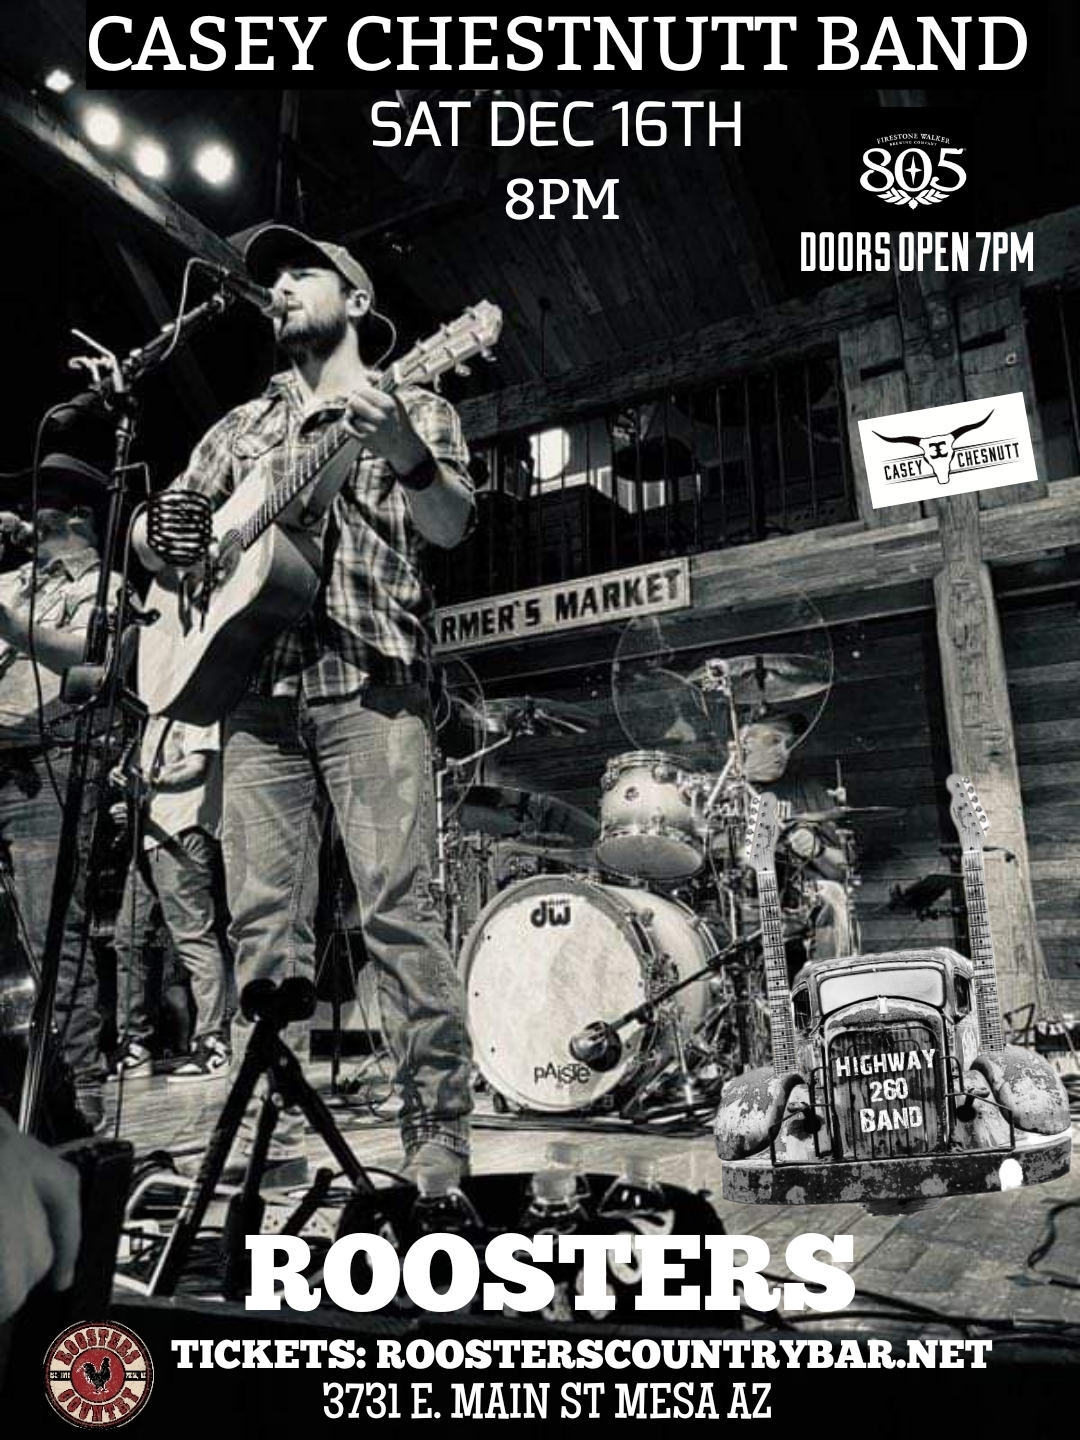 Casey Chestnutt Band – Tickets on Sale Soon